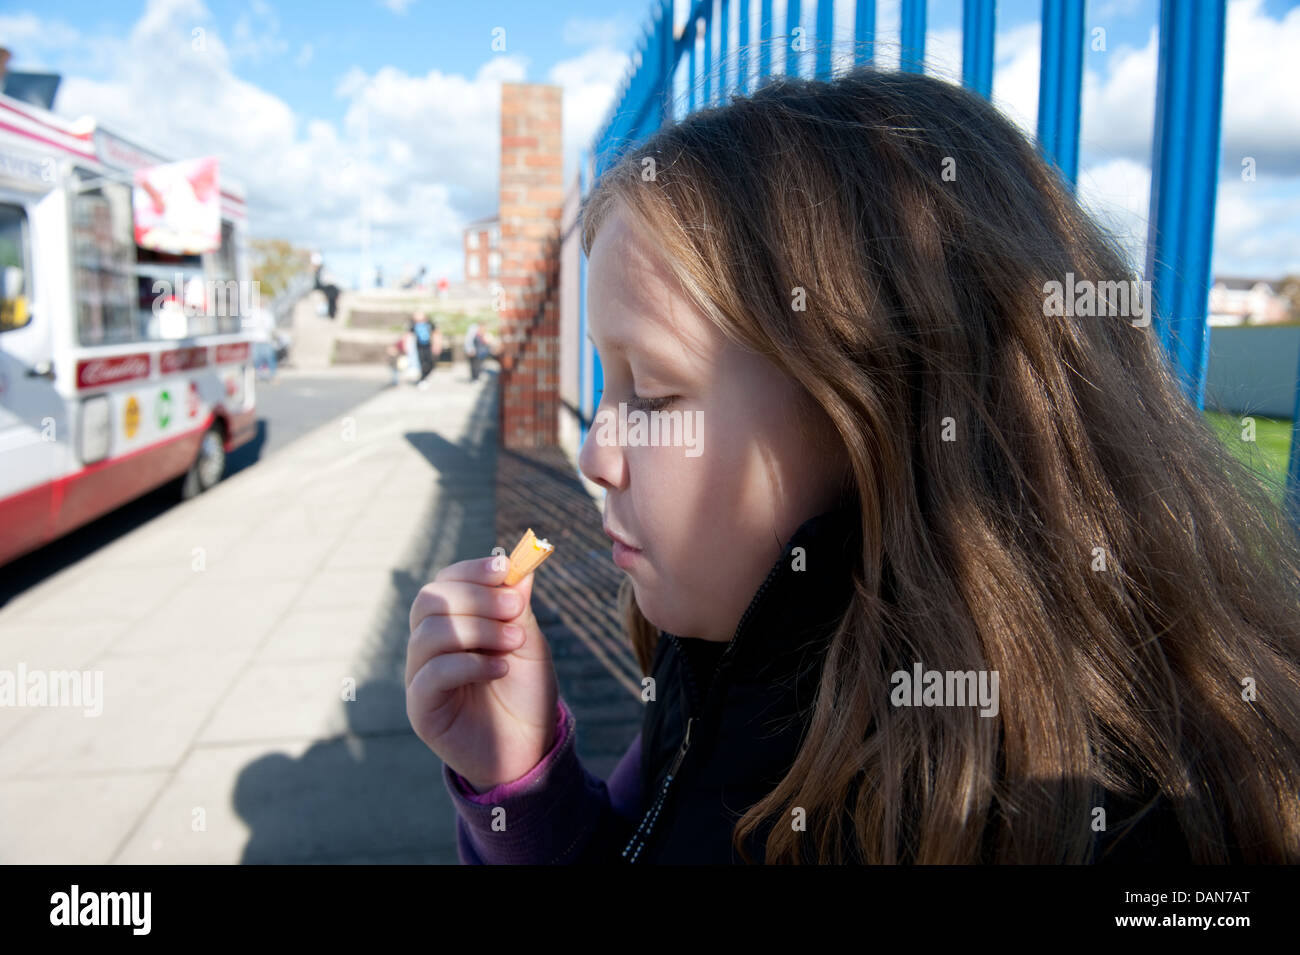 Young girl finishing eating ice cream cone FULLY MODEL RELEASED Stock Photo